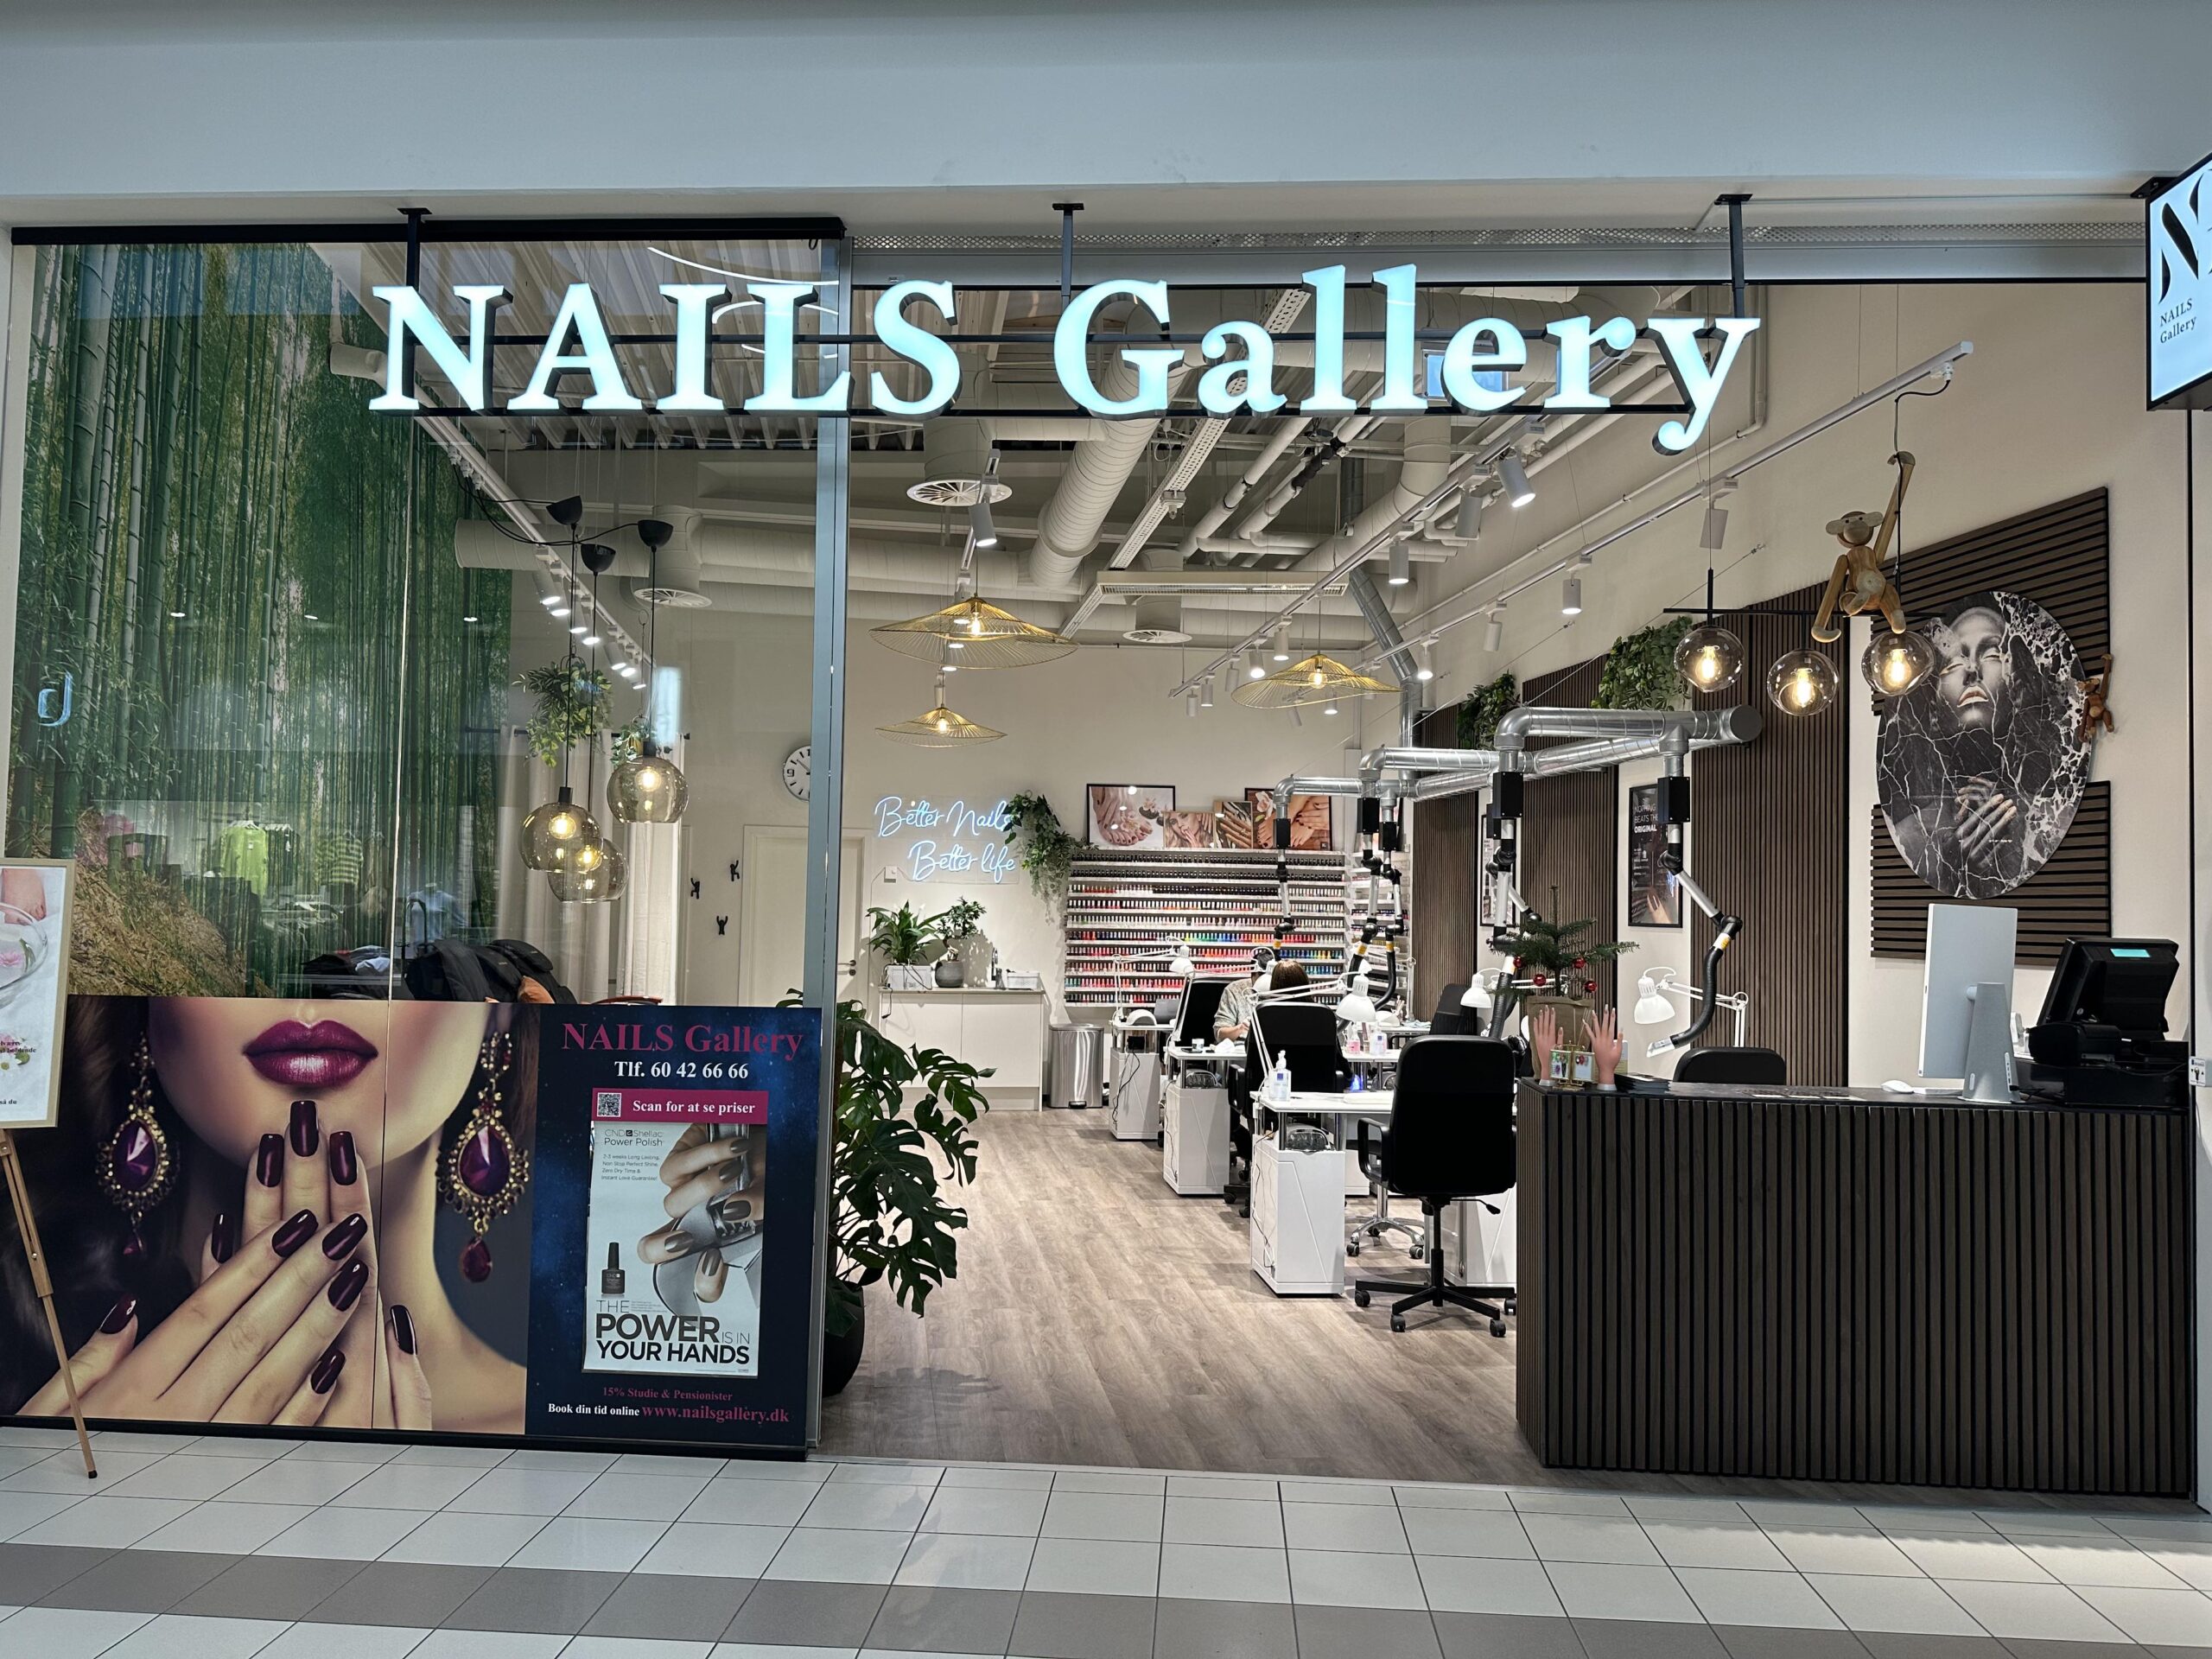 nails gallery amager